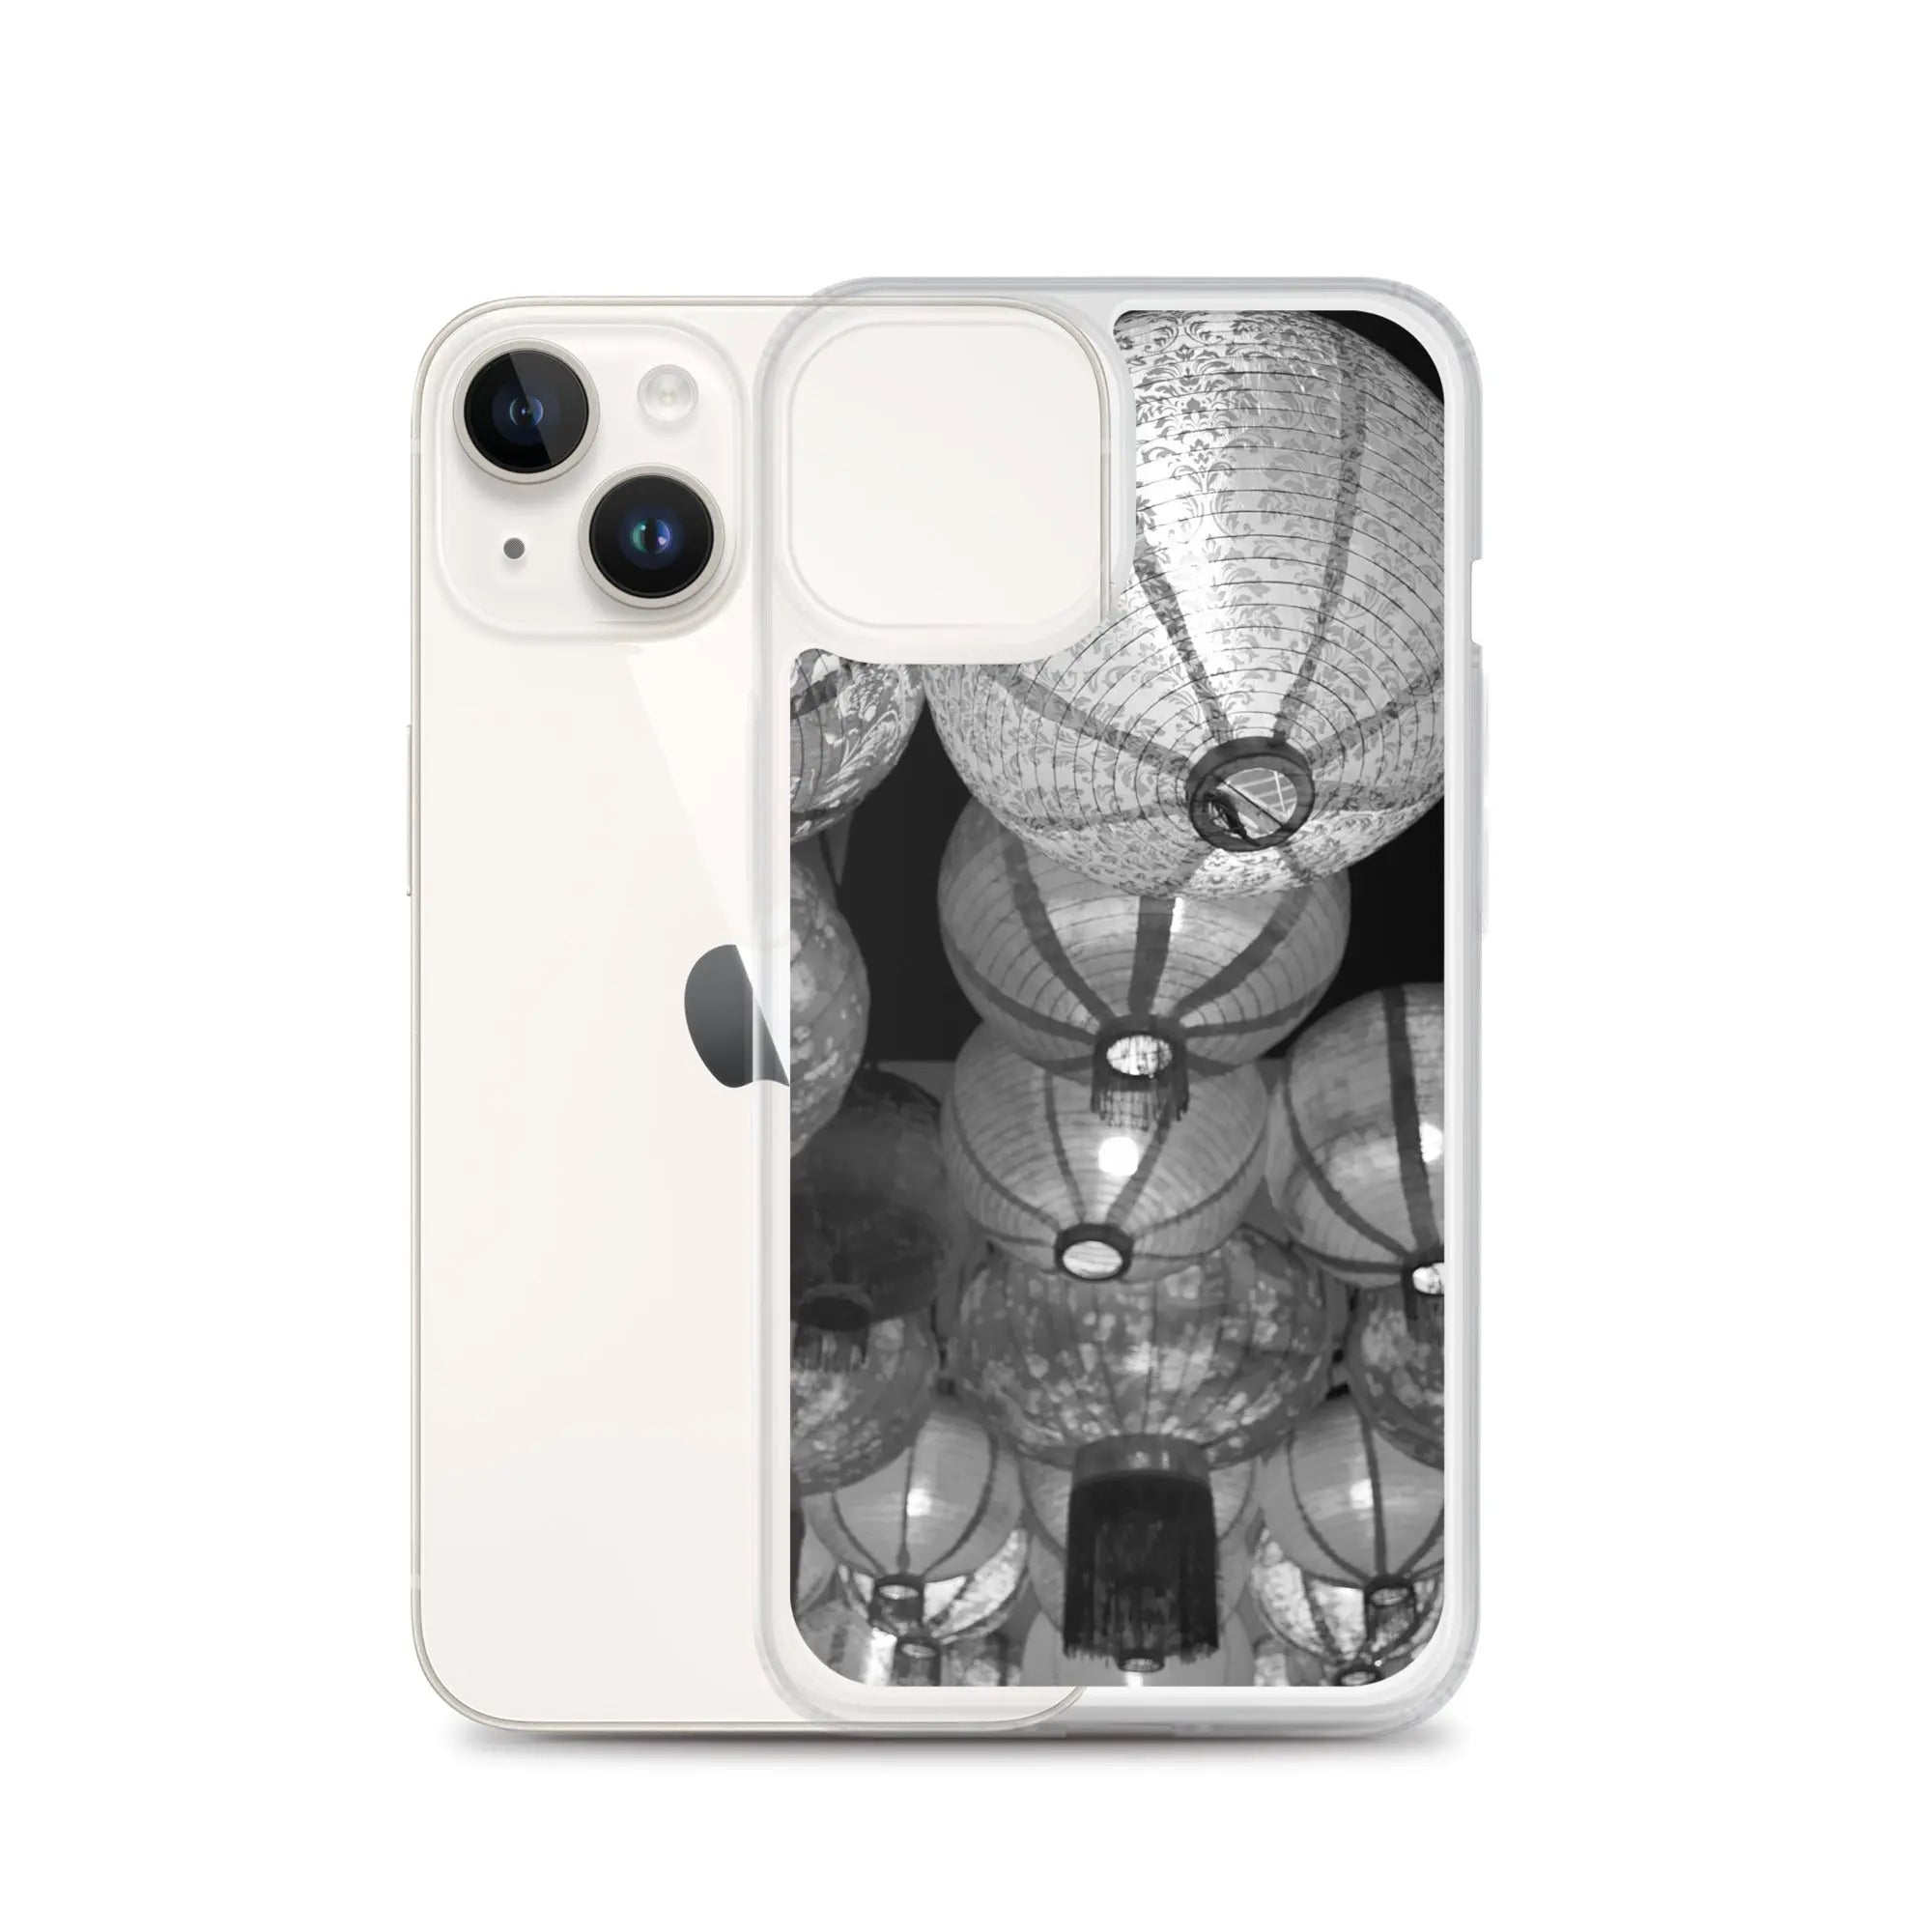 Raise The Red Lanterns - Designer Travels Art Iphone Case - Black And White - Iphone 14 - Mobile Phone Cases